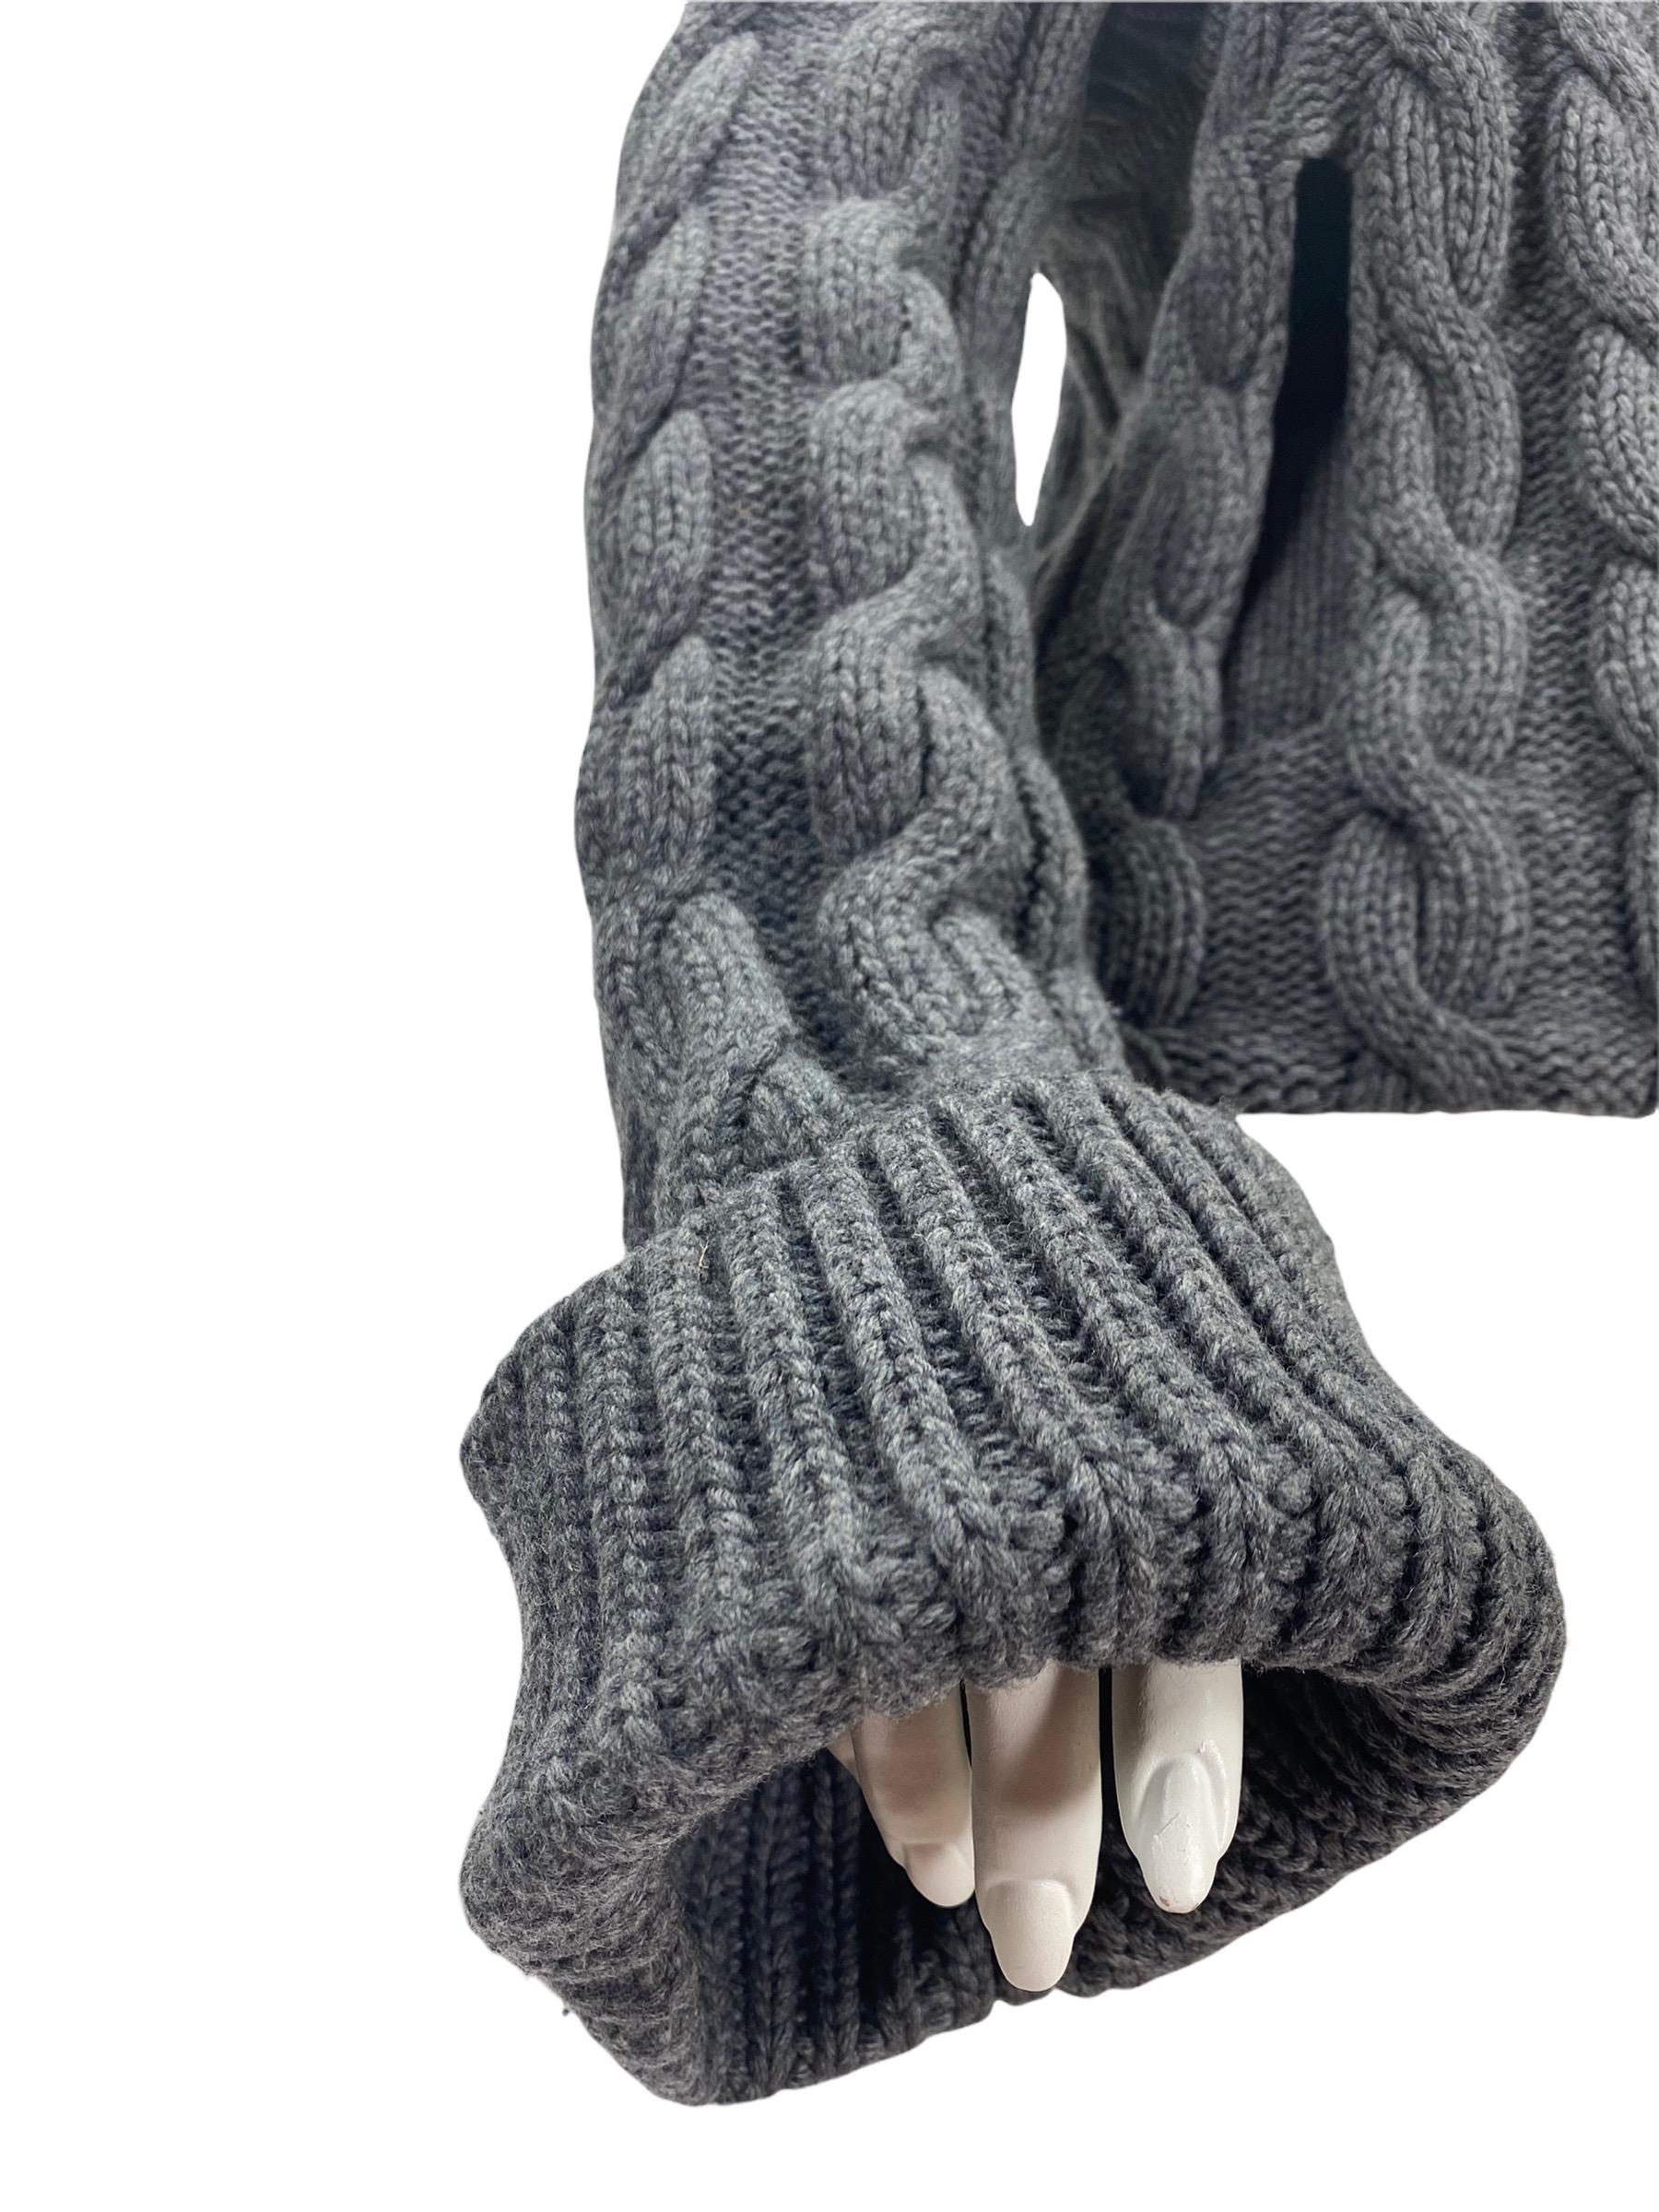 A/W 2006 ALEXANDER McQUEEN The Widows of Culloden Knit Convertible Cardigan Coat For Sale 2